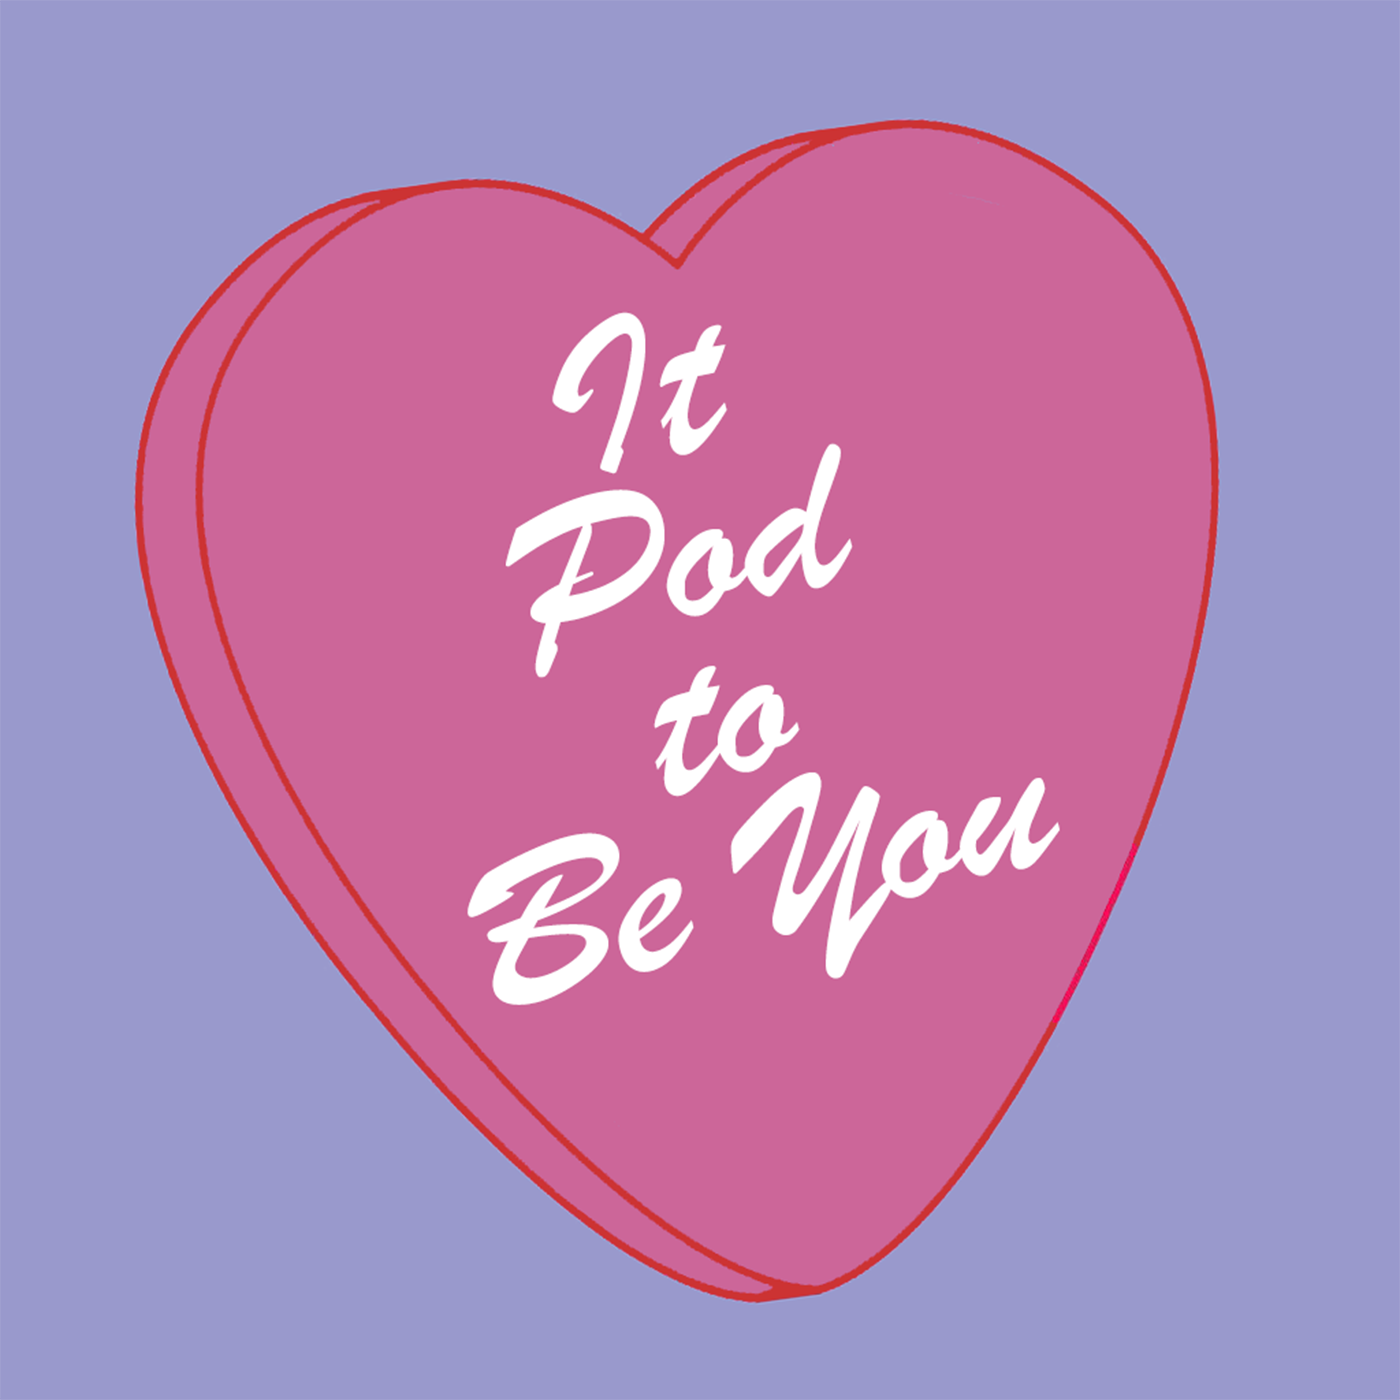 It Pod to Be You